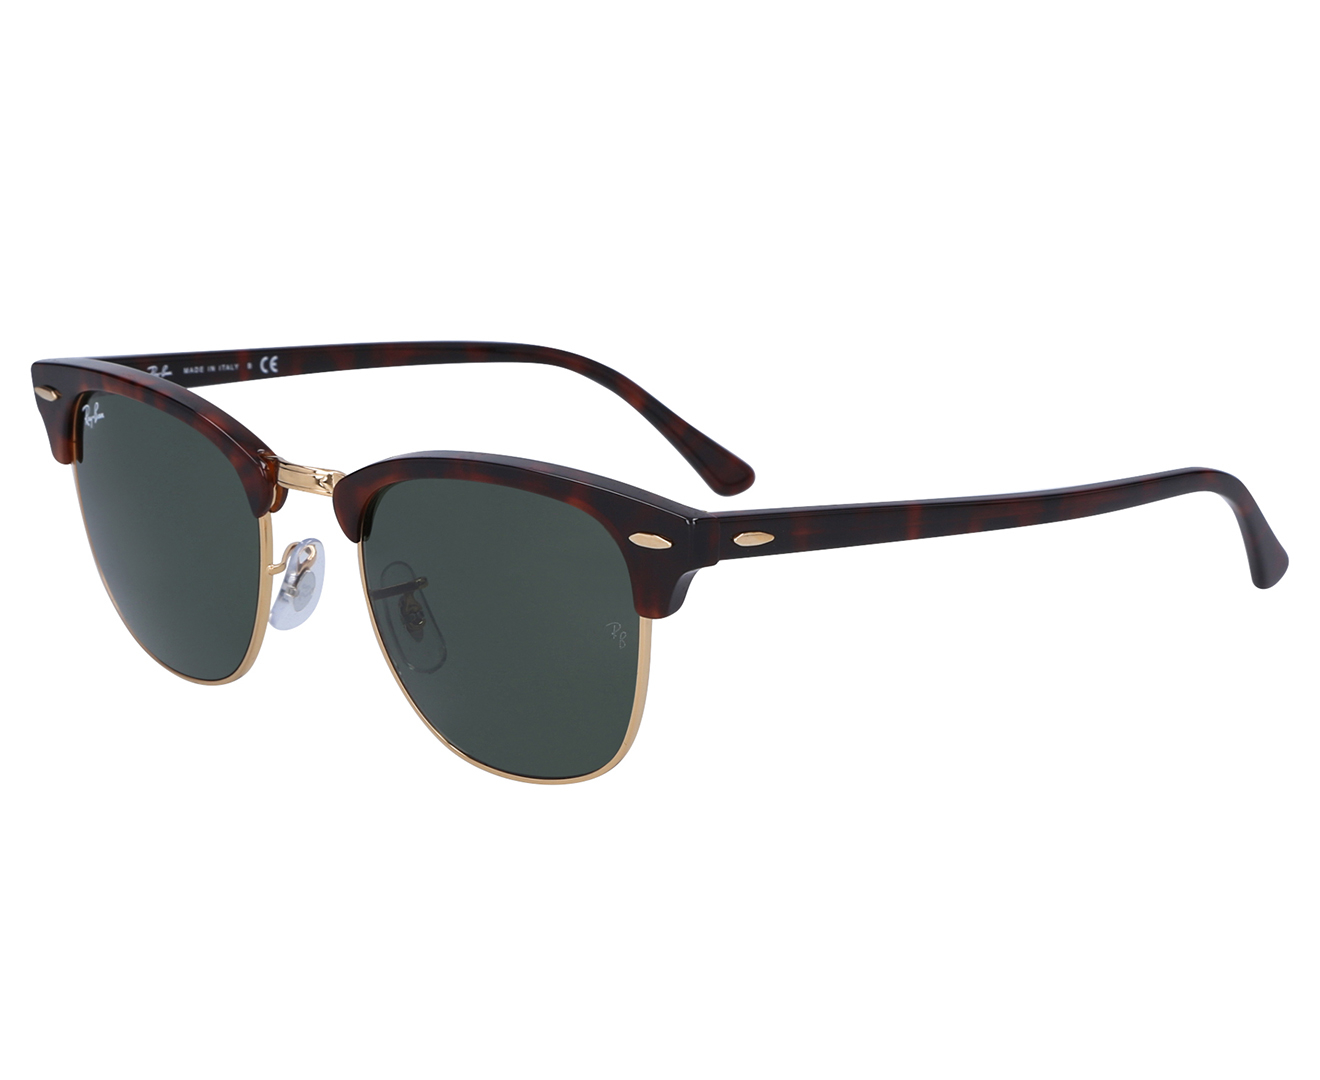 Ray-Ban Clubmaster Classic RB3016 Sunglasses - Tortoise/Green 